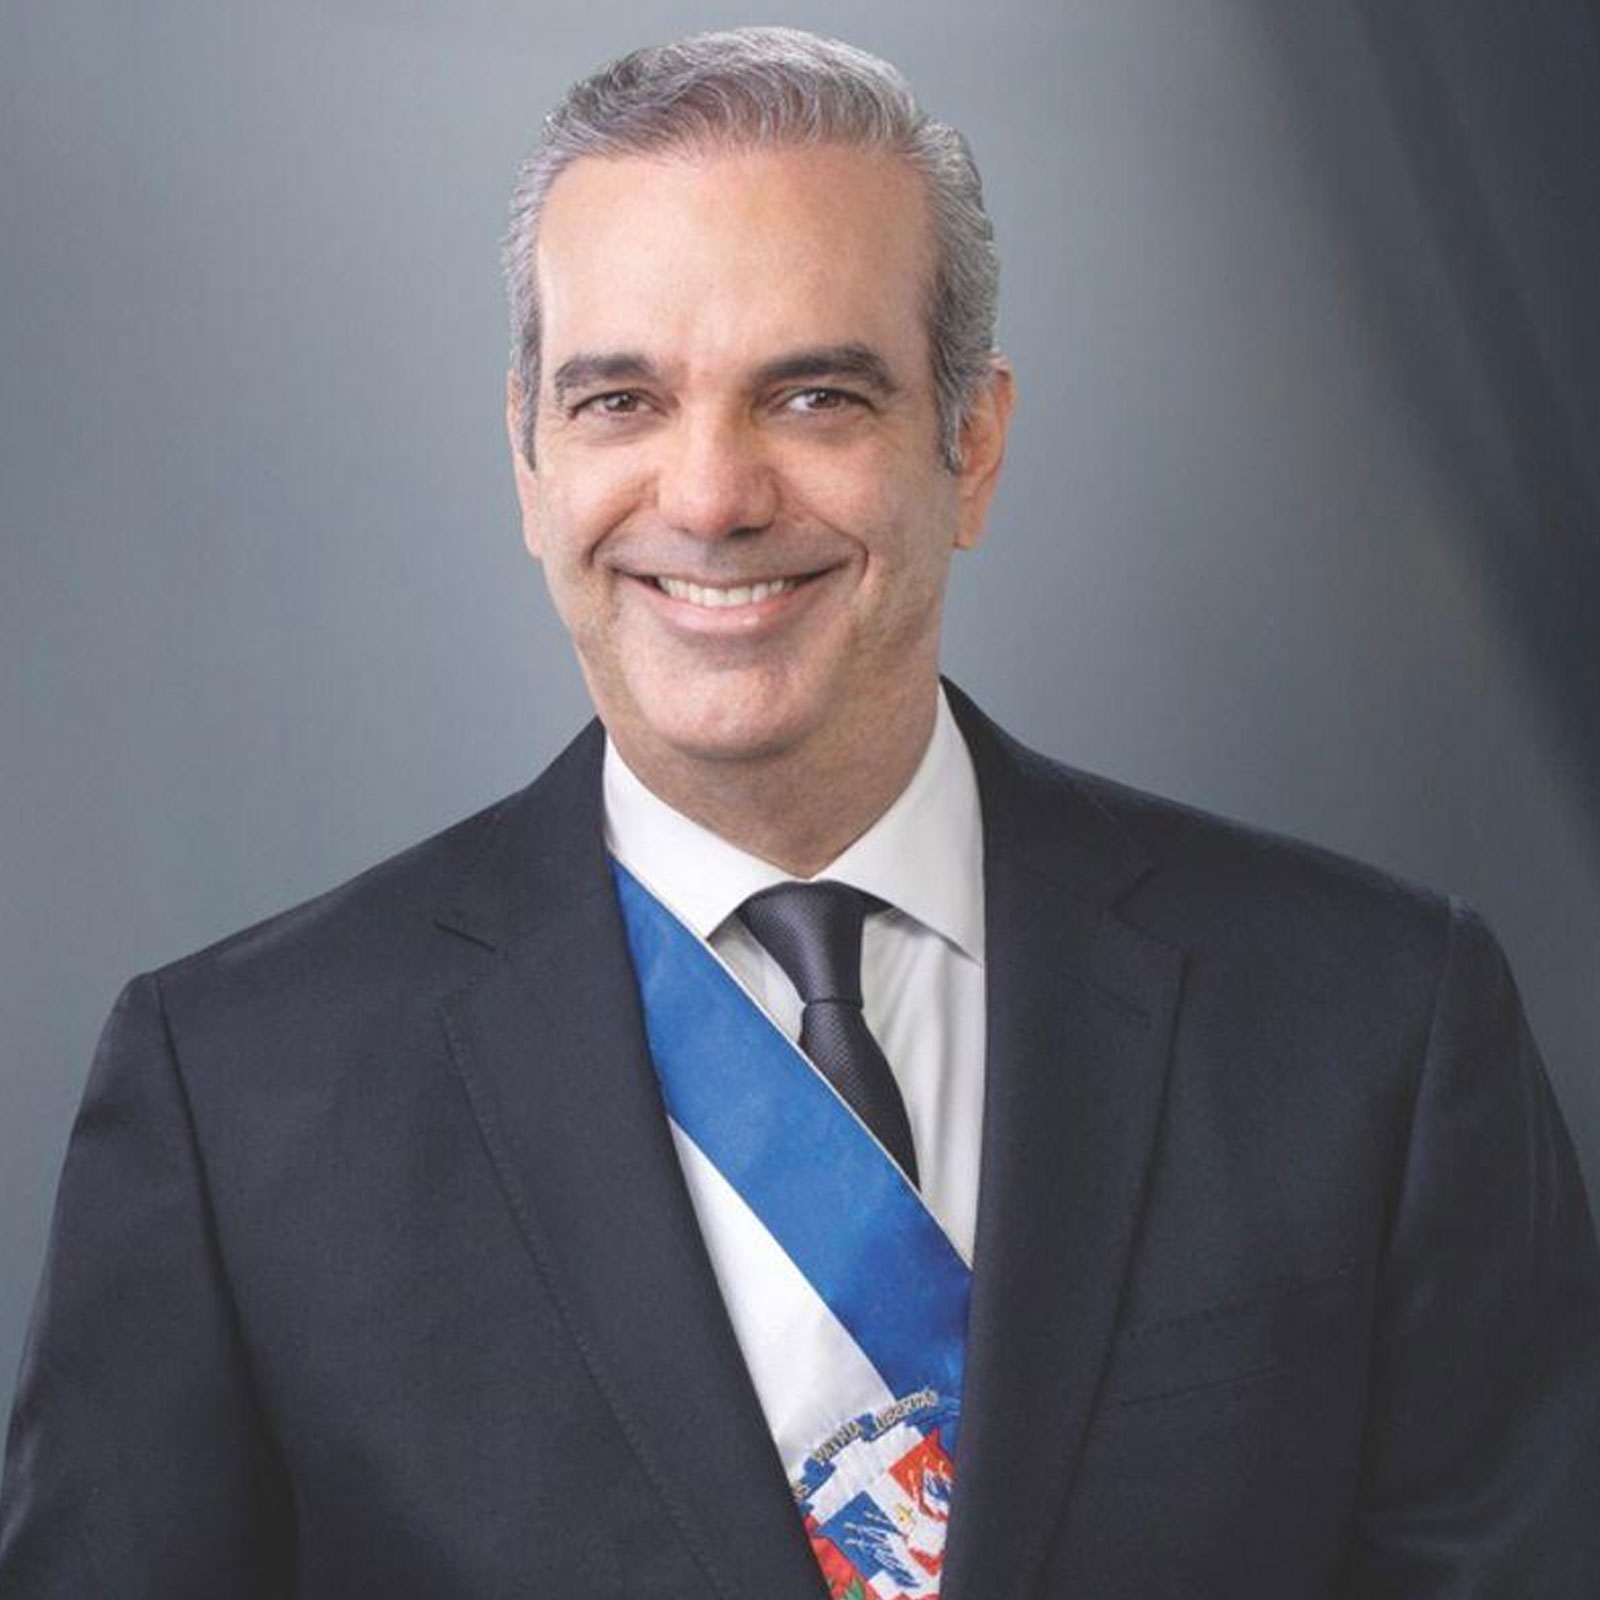 Luis Abinader, President of the Dominican Republic